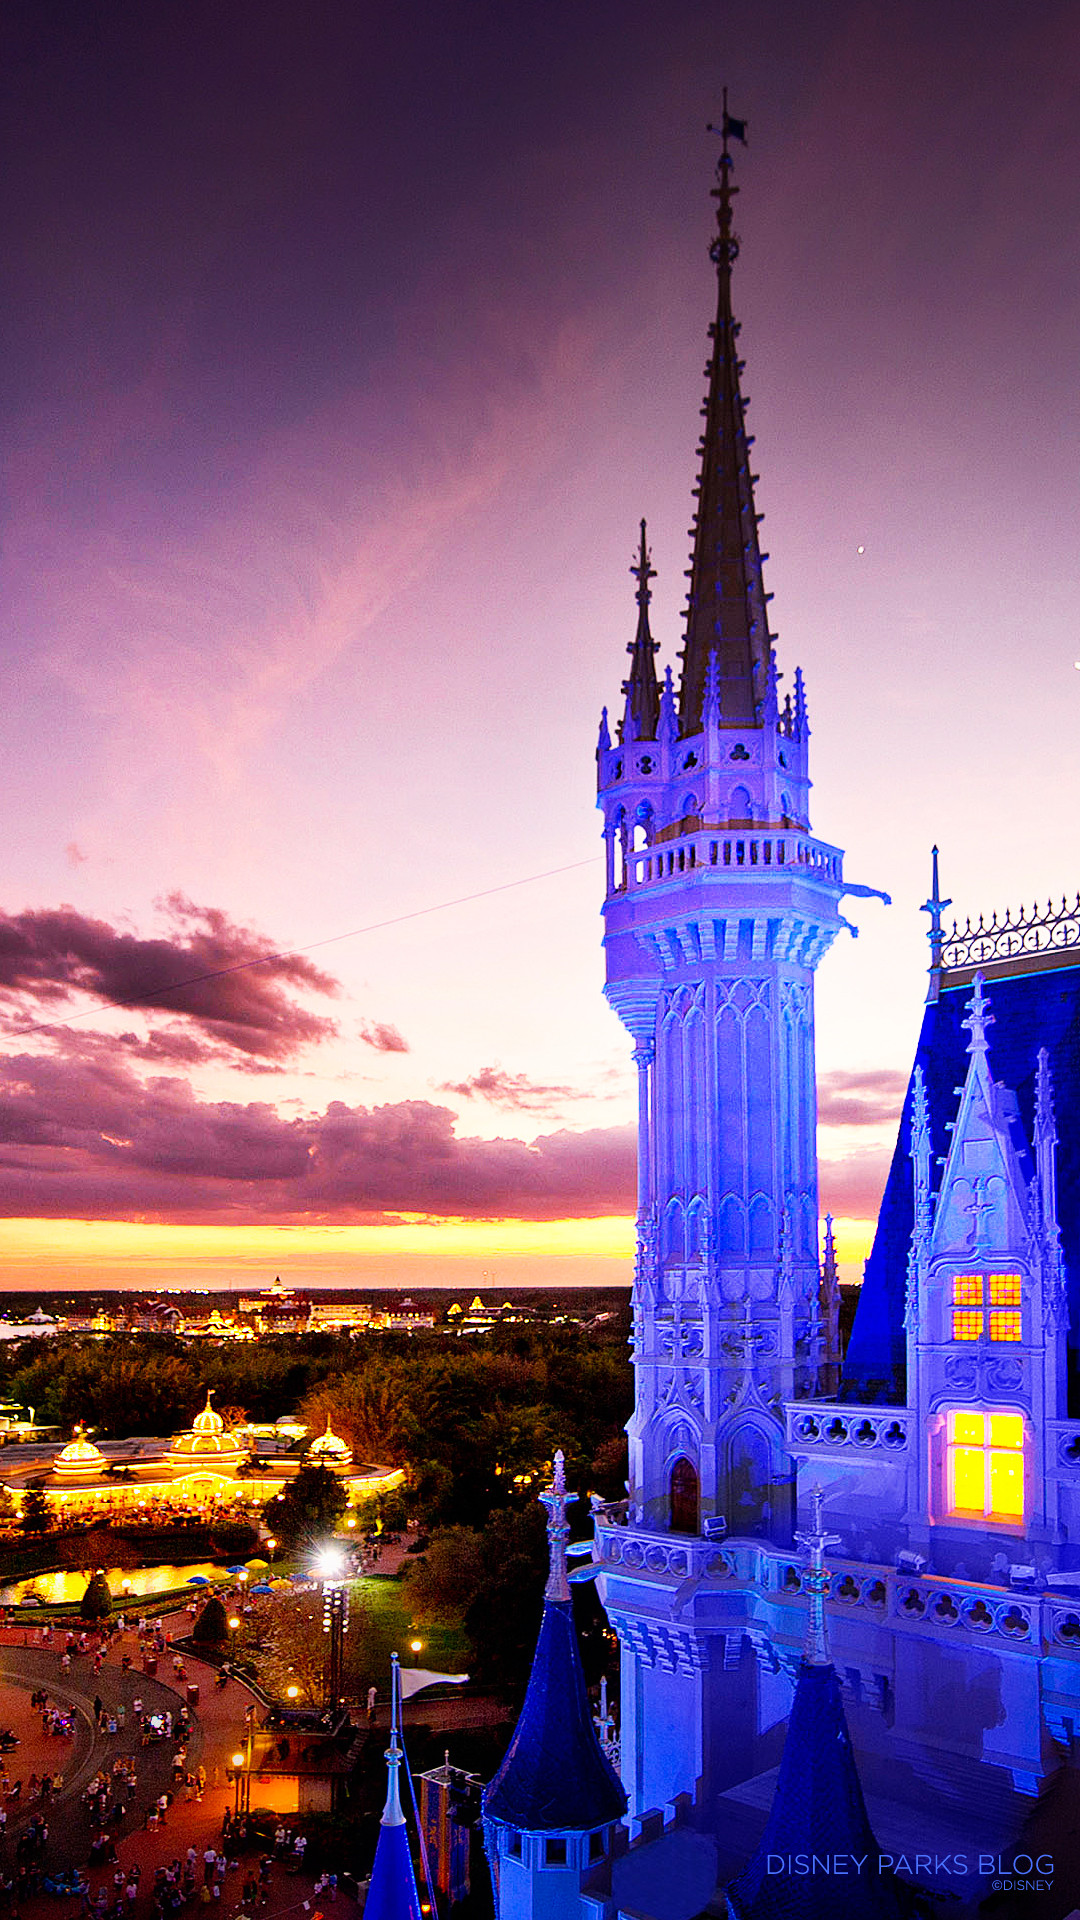 Cinderella Castle Sunset Iphone6 Wallpapers Iphone Wallpapers